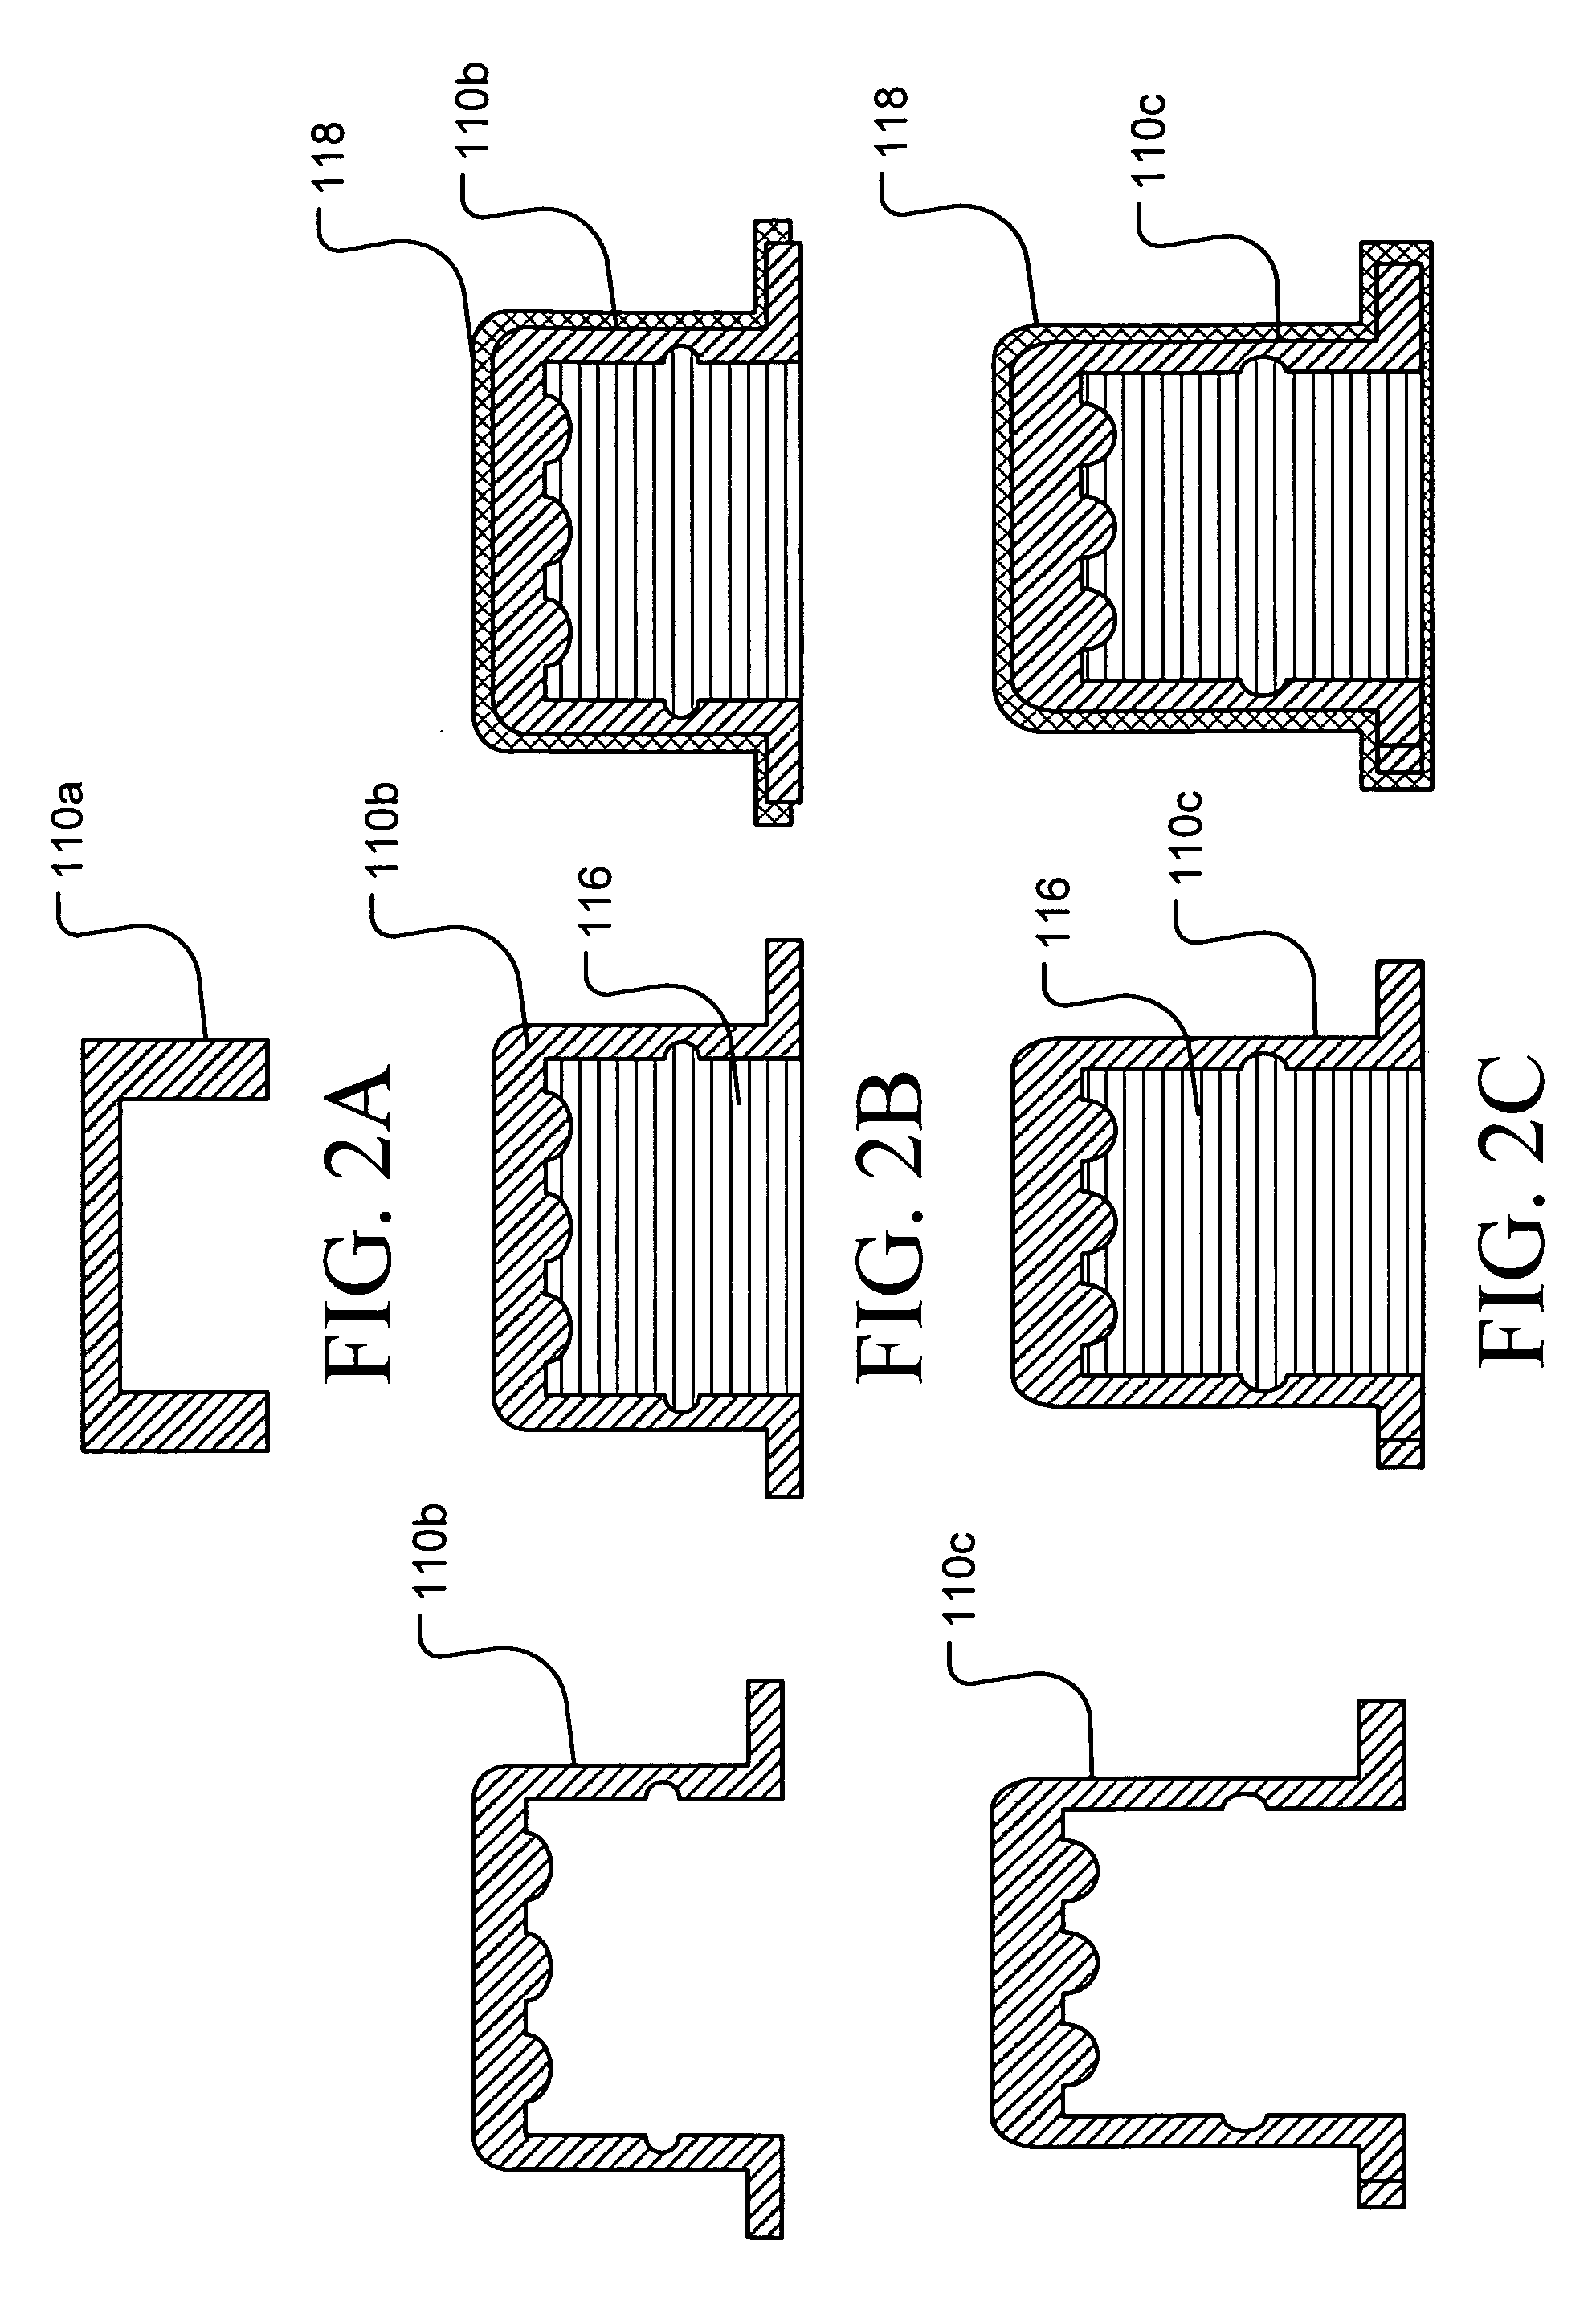 Tri-excluded WUCS glass fiber reinforced plastic composite articles and methods for making such articles